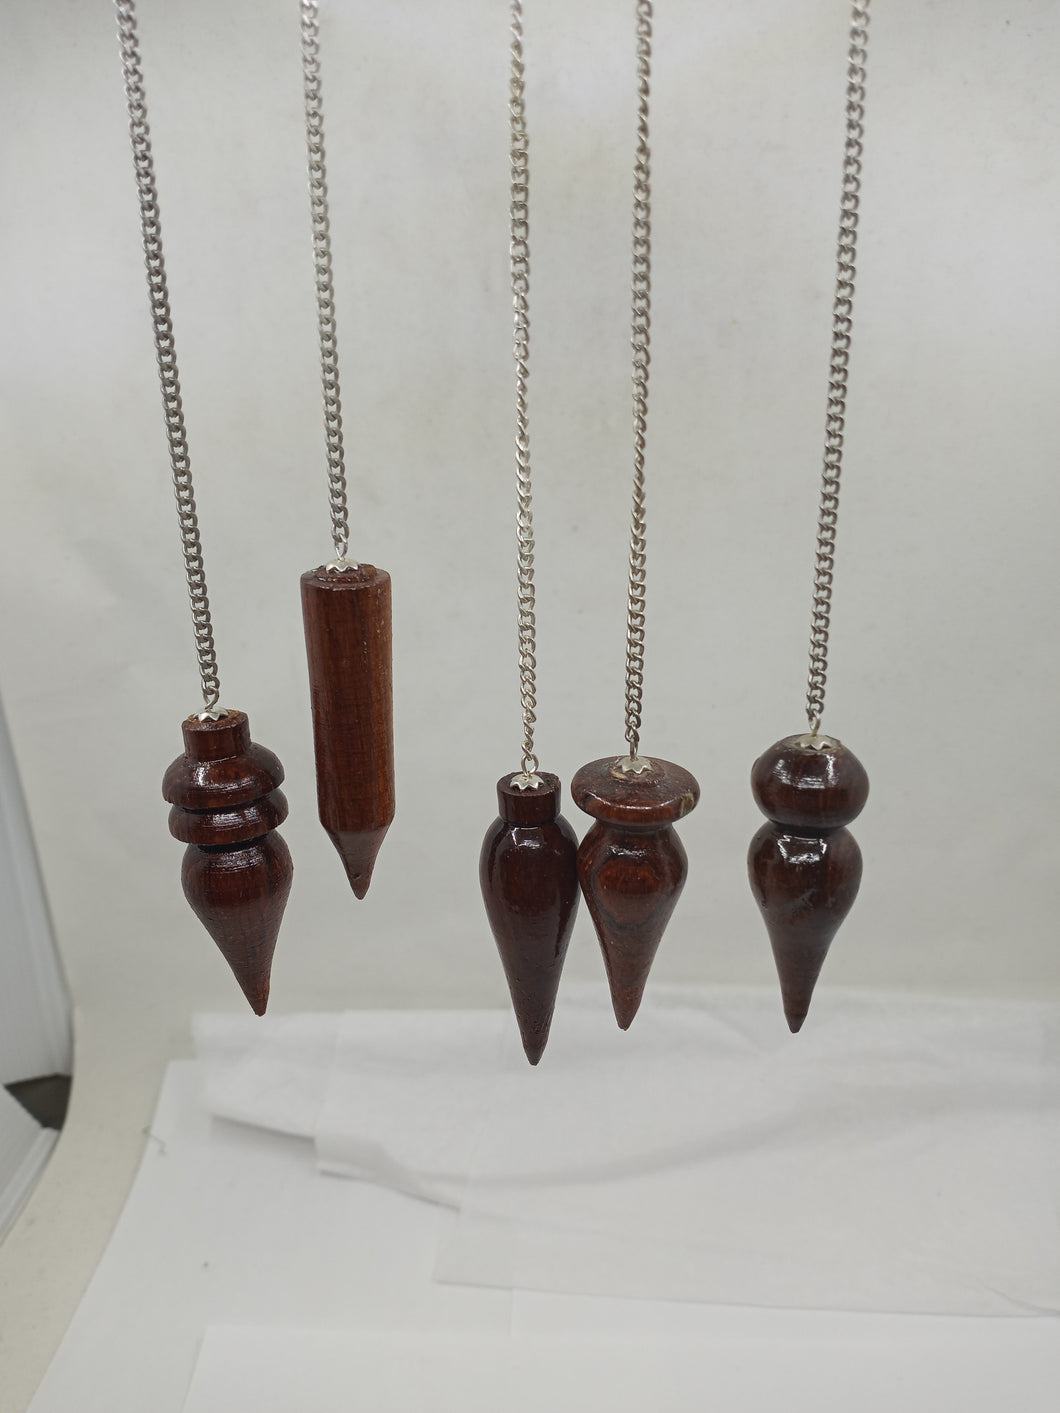 A collection of exquisite rosewood pendulums, each uniquely shaped, elegantly hangs from a silver chain.